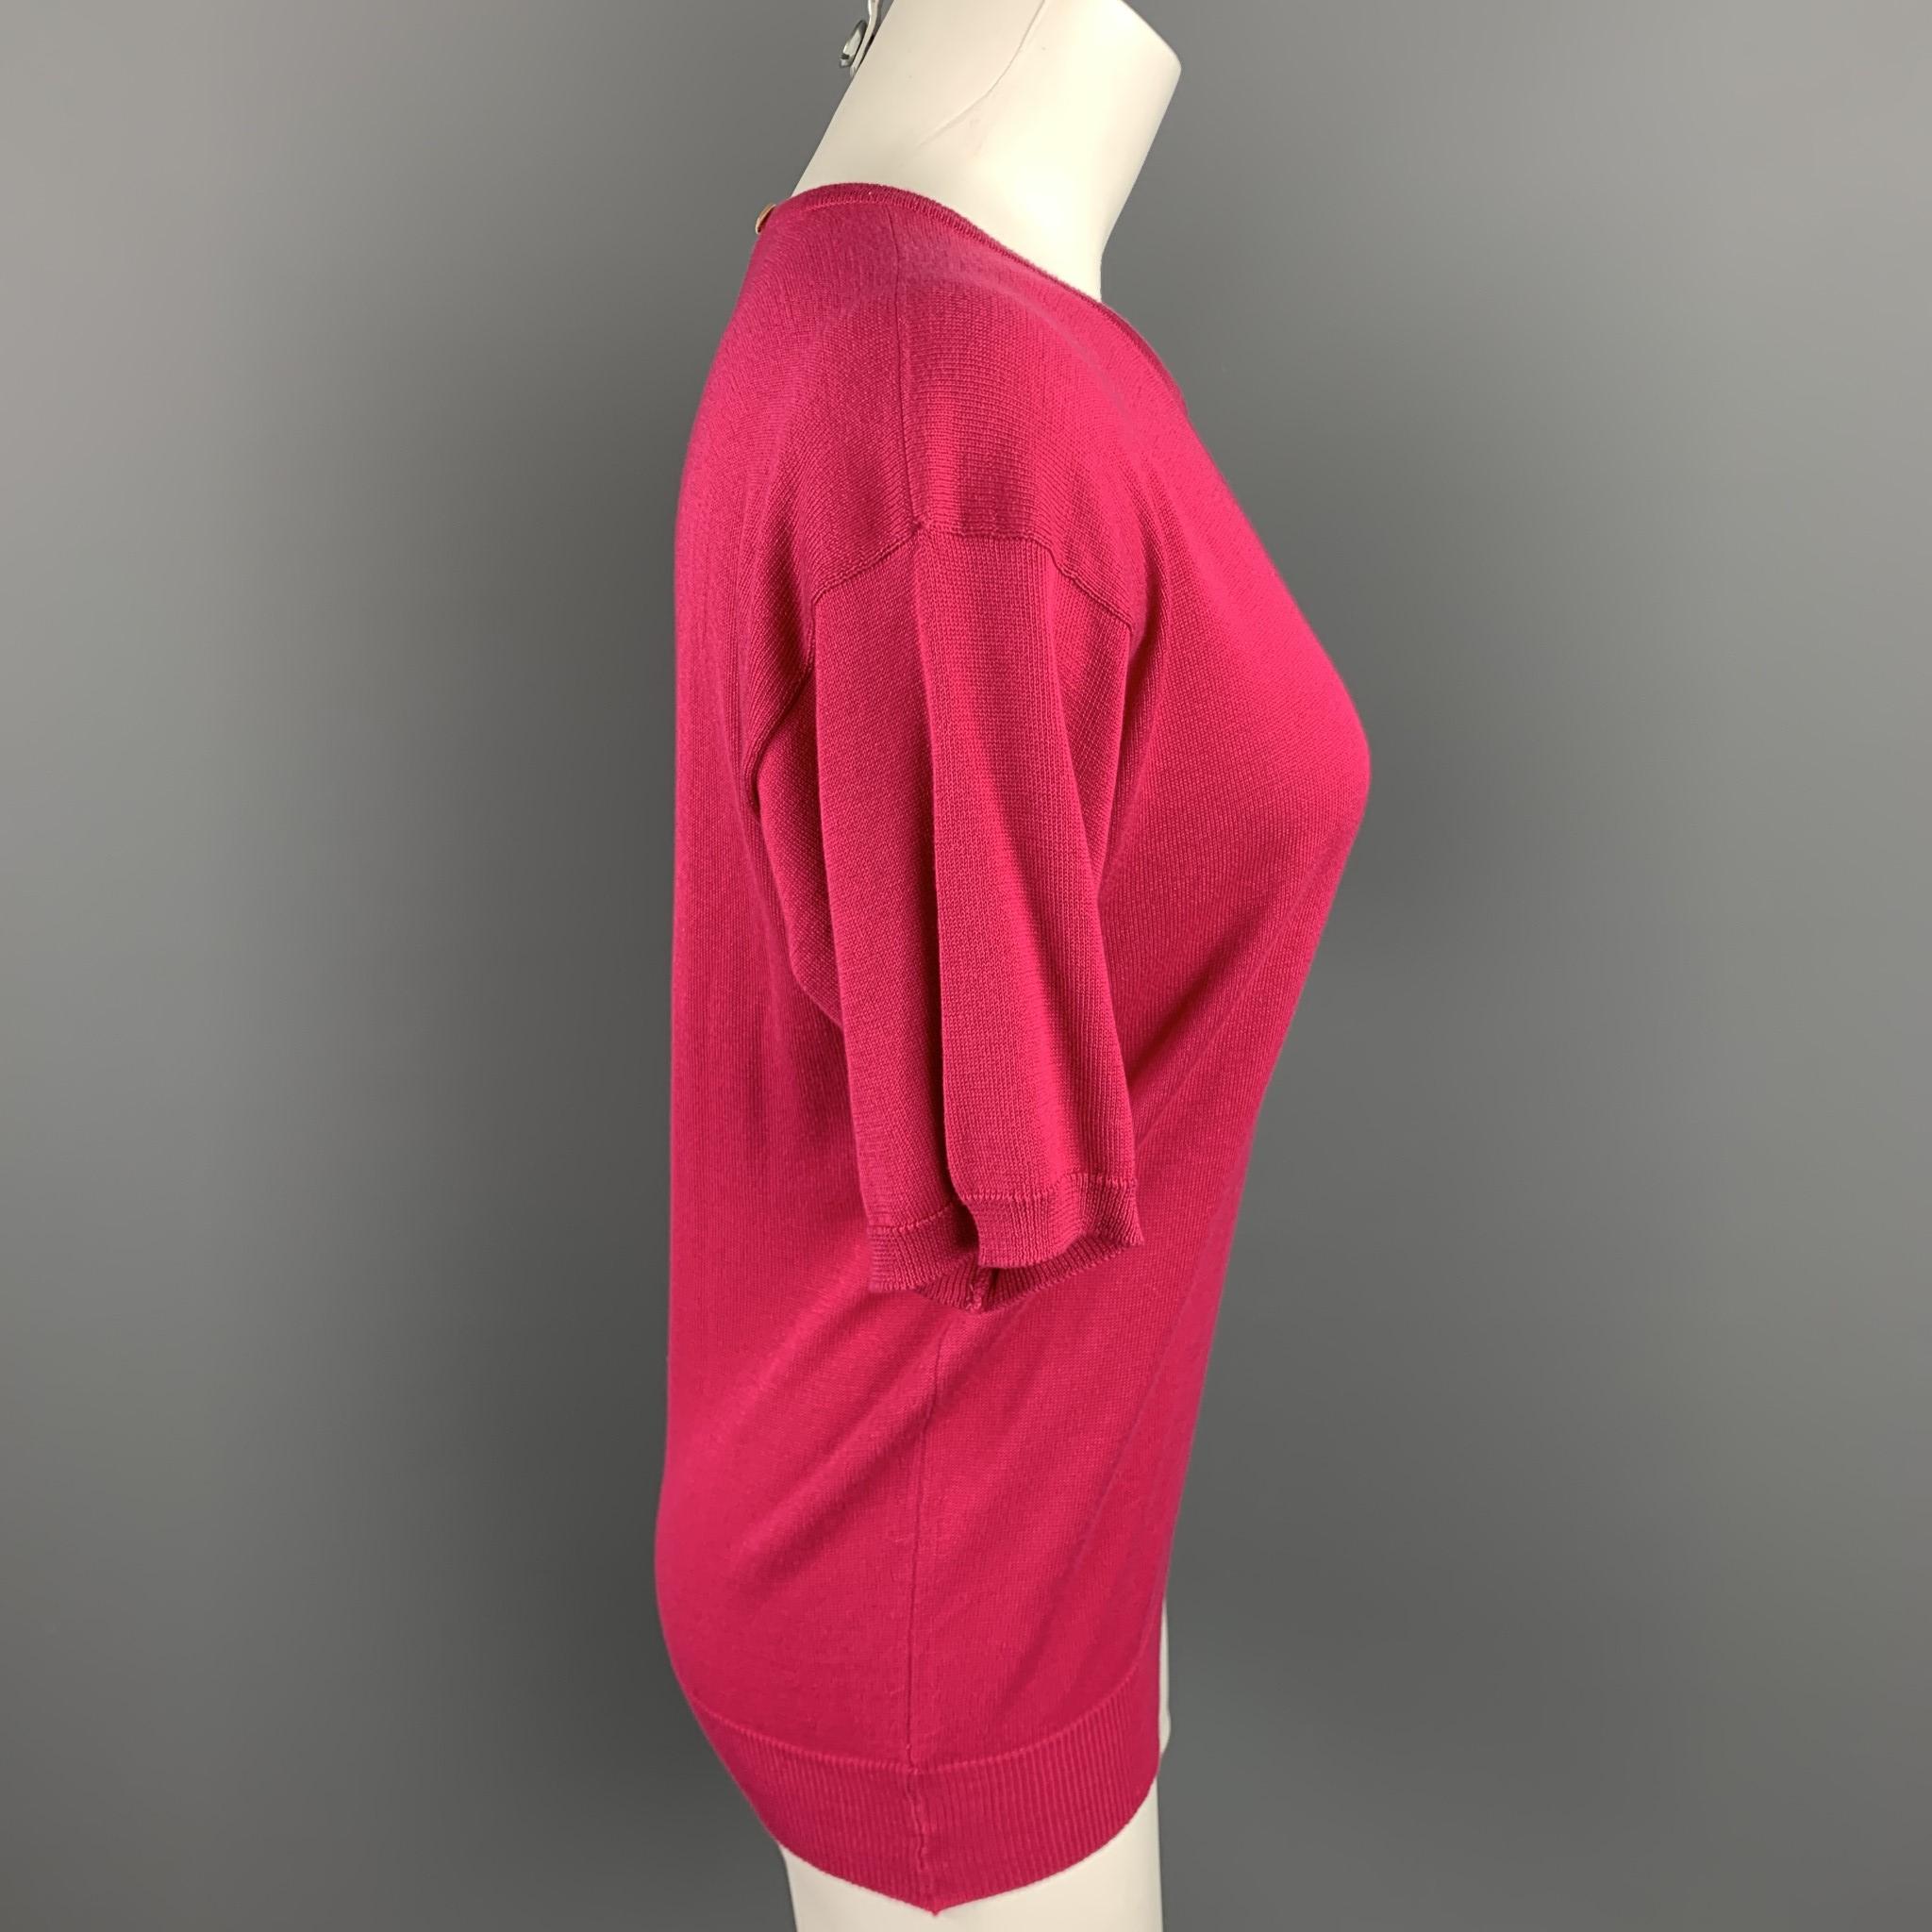 YVES SAINT LAURENT Rive Gauche sweater comes in a fuchsia cotton featuring a crew-neck and back button detail. Made in Scotland.

Good Pre-Owned Condition.
Marked: 36

Measurements:

Shoulder: 19 in. 
Bust: 34 in. 
Sleeve: 8.5 in. 
Length: 24 in. 